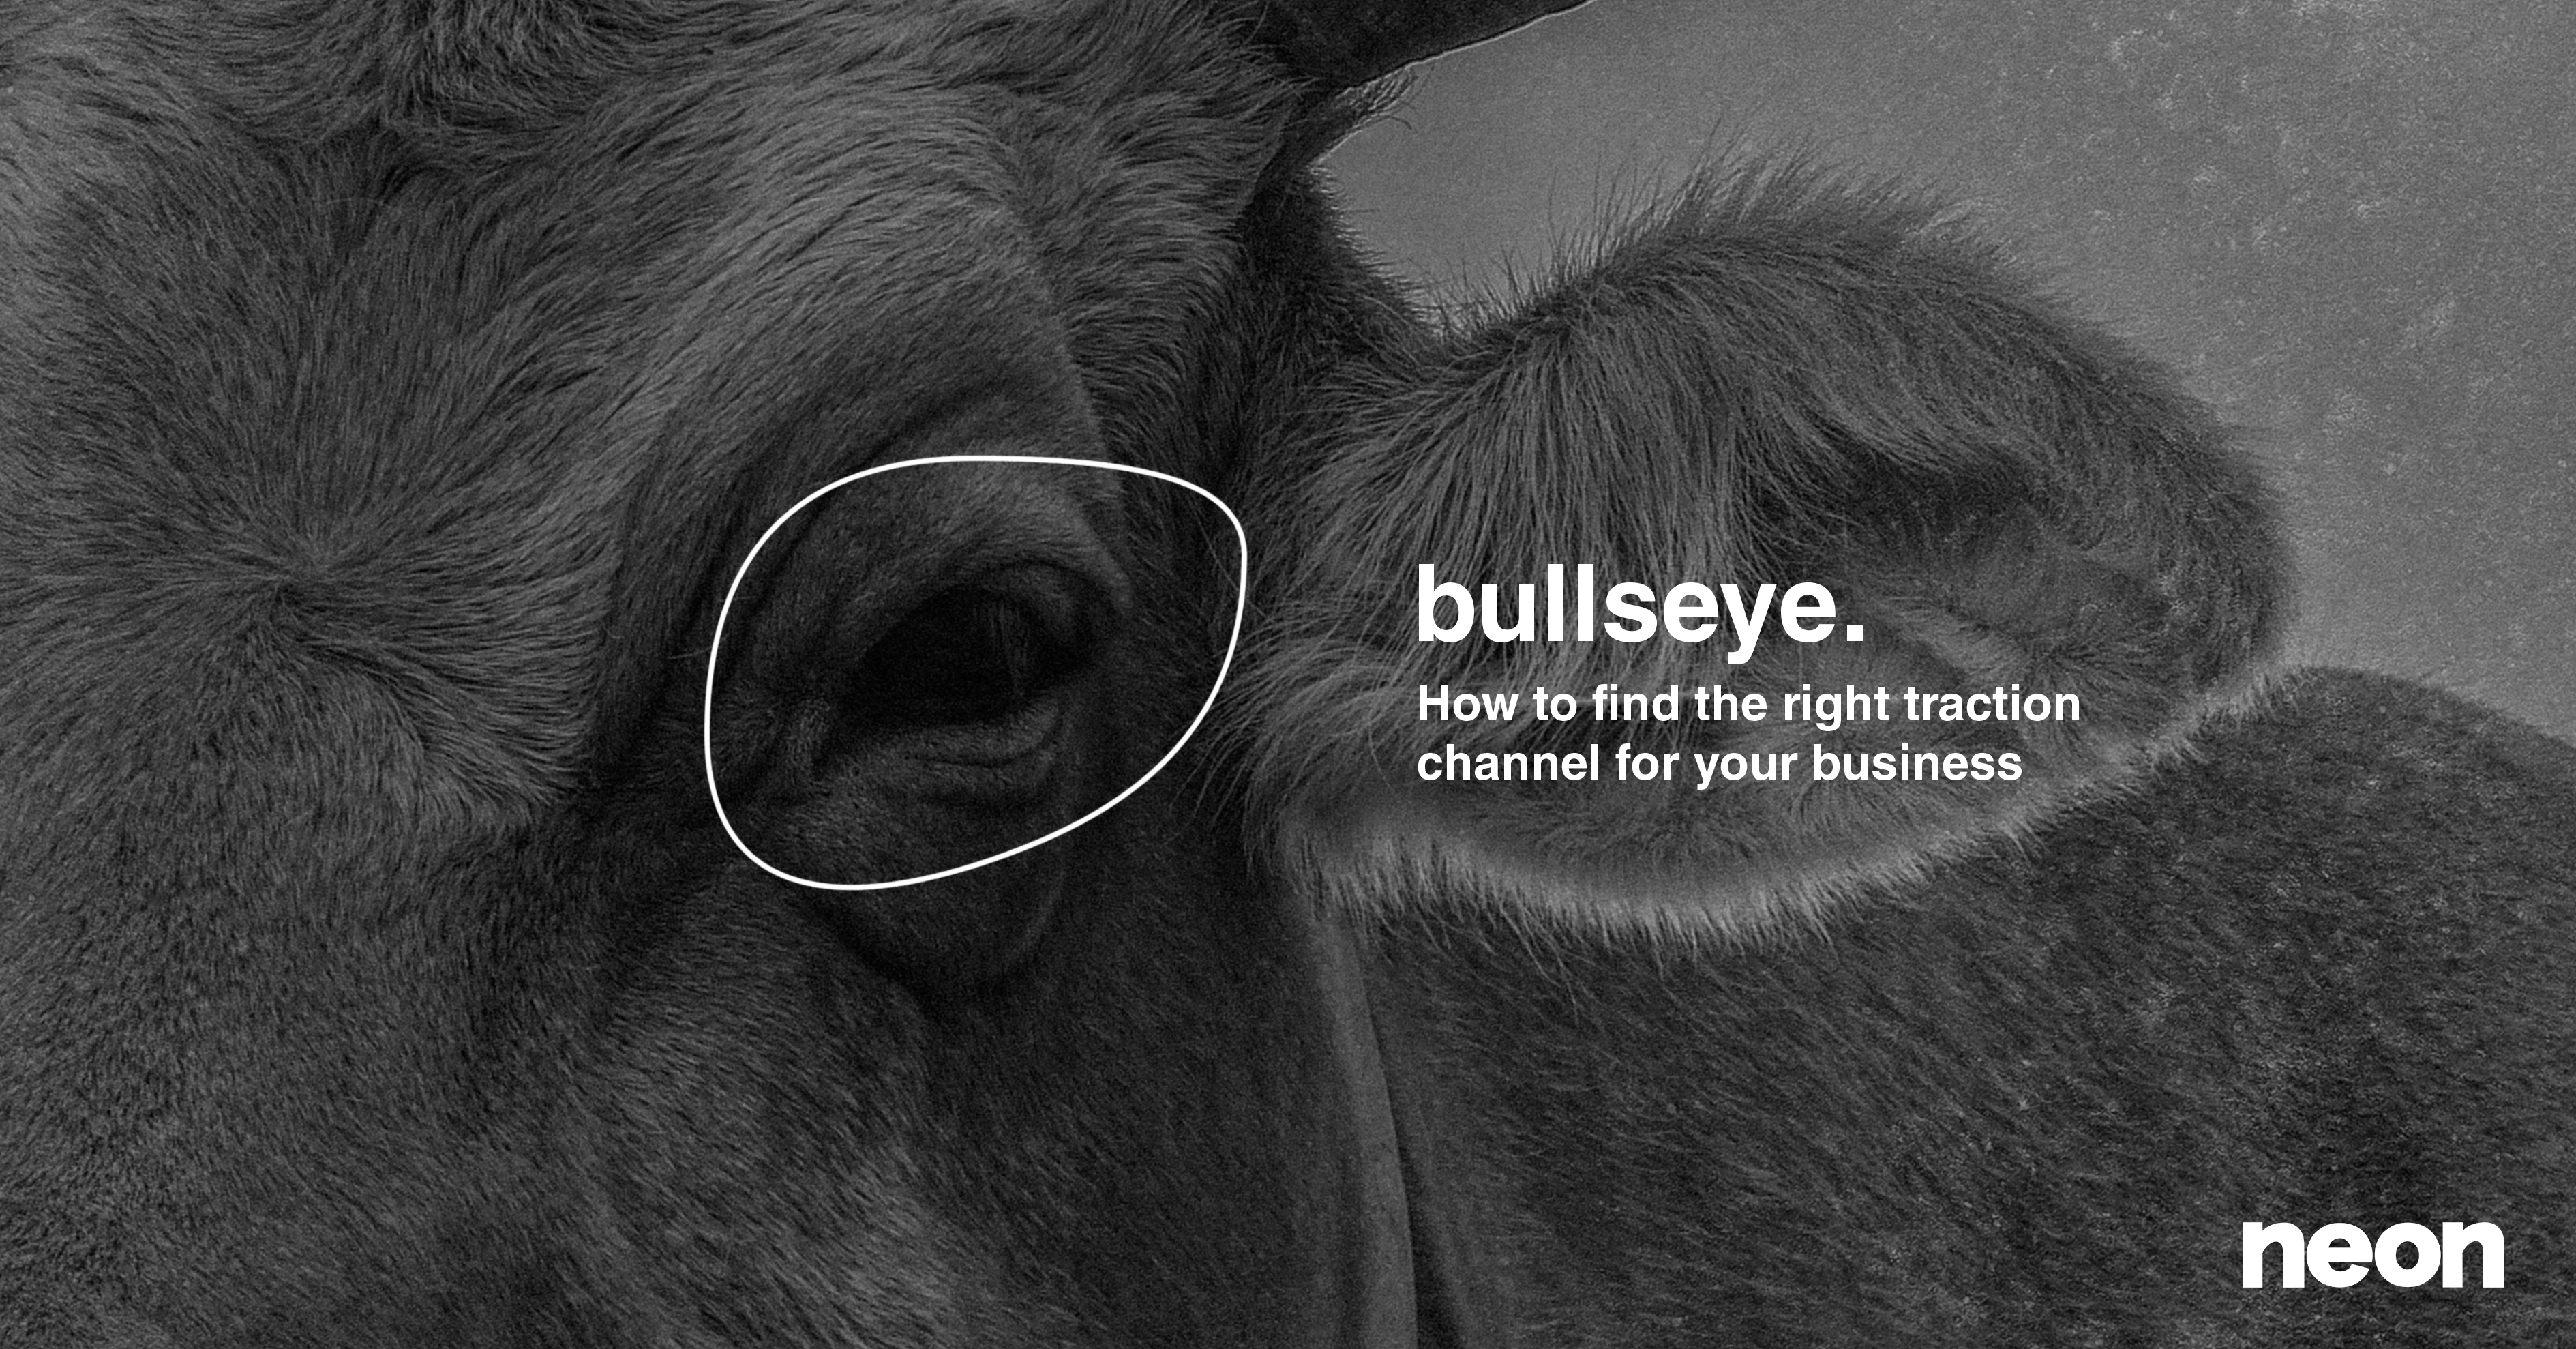 Bullseye – How to find the right channel for your business